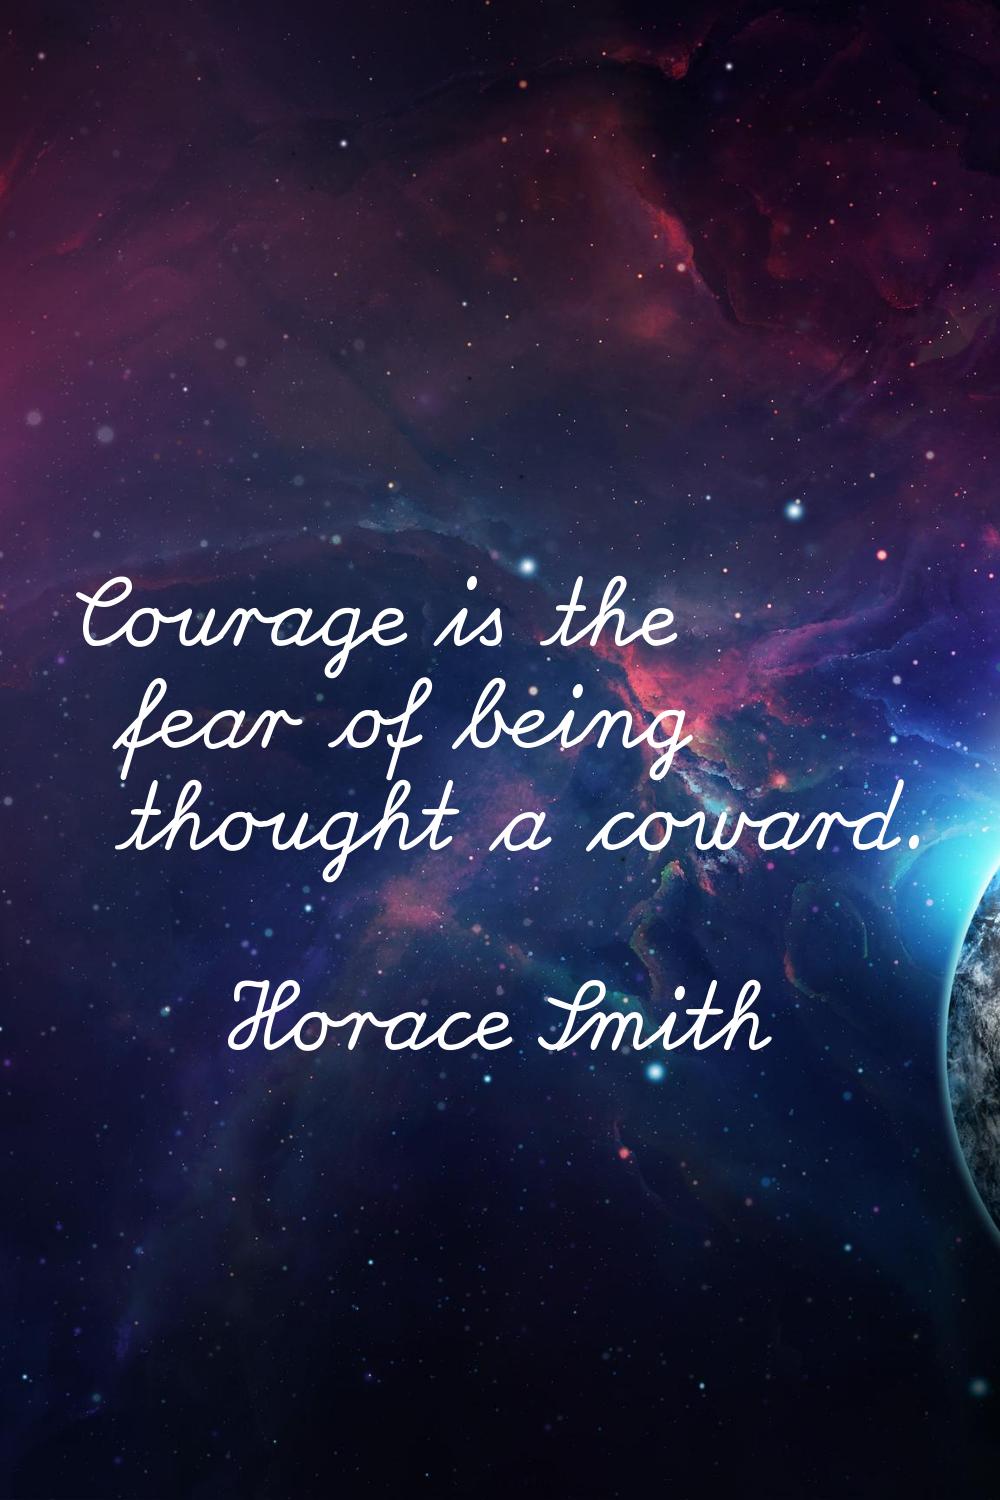 Courage is the fear of being thought a coward.